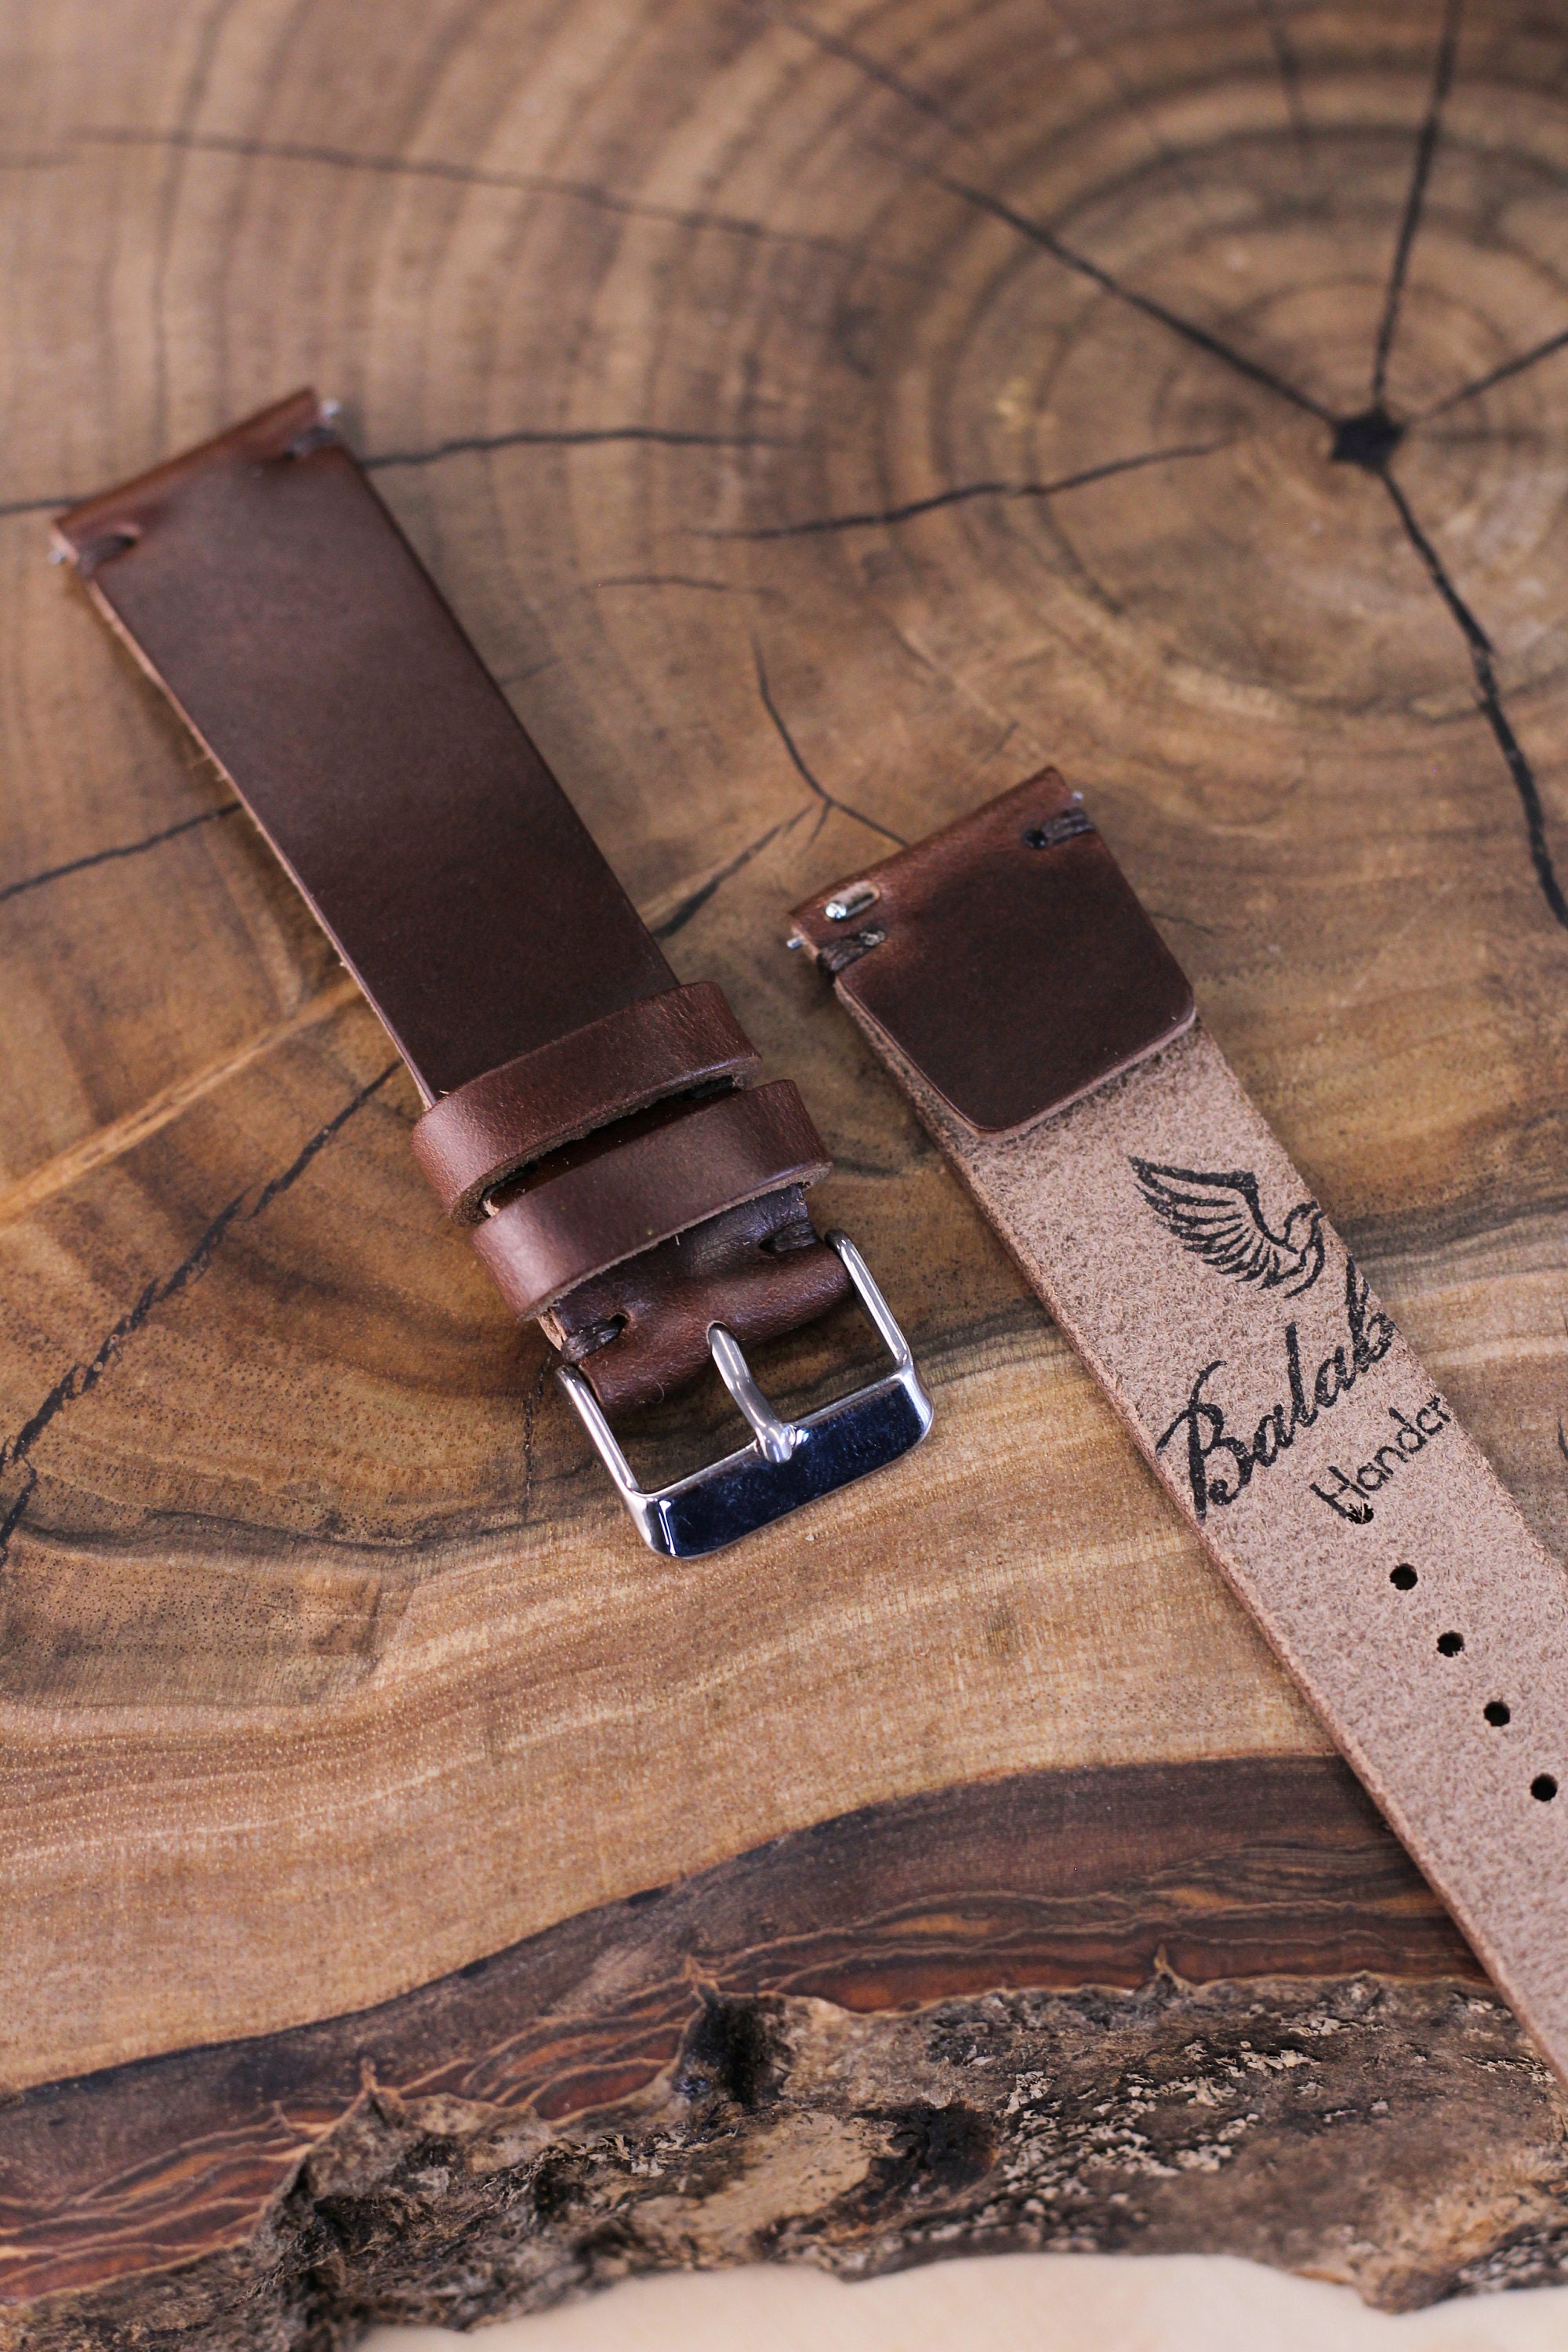 Buy Horween Leather Watch Strap Band in Brown Chromexcel / 100% Handmade  /single Layer Leather Strap / 24 Mm, 22 Mm, 20 Mm, 18 Mm Custom Sized  Online in India - Etsy